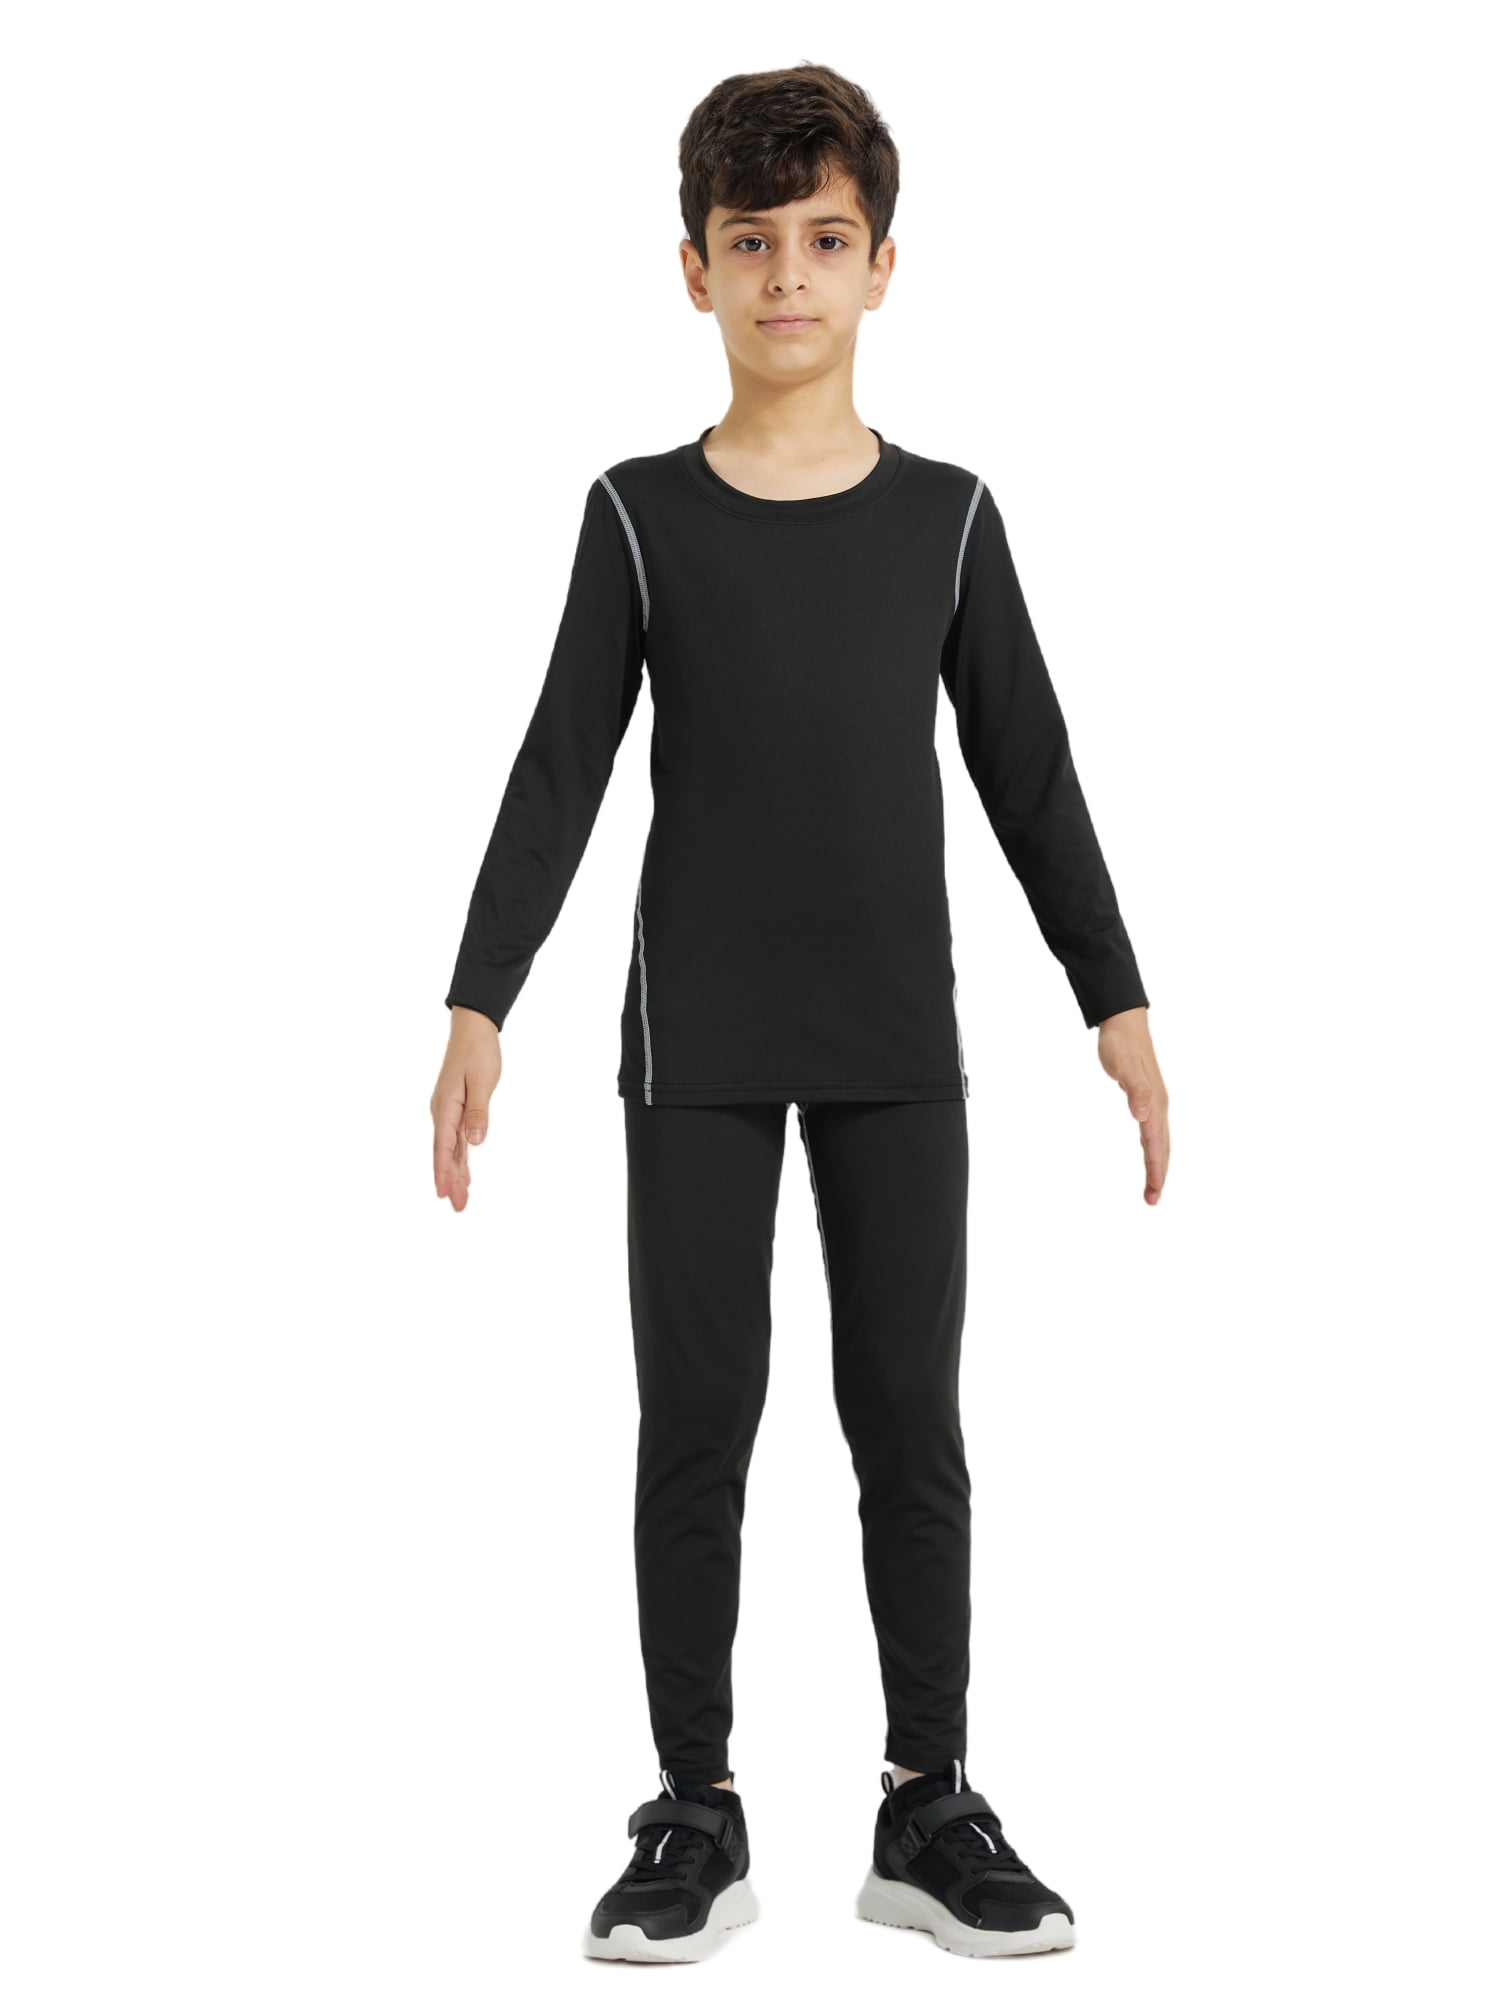 What is Boys and Girls Thermal Underwear Set